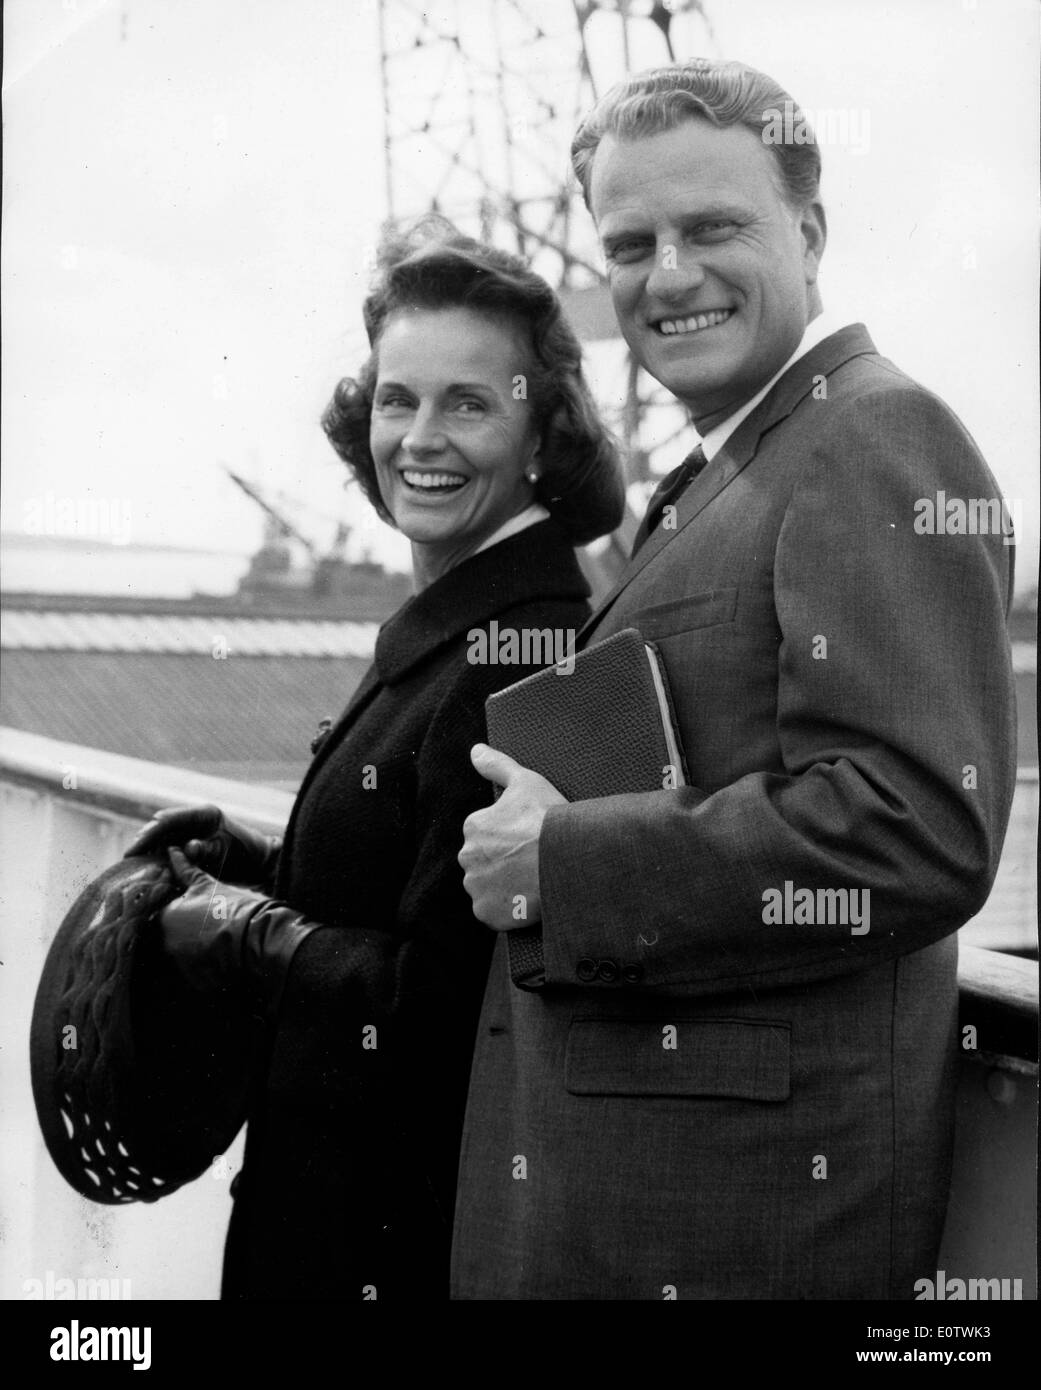 Reverend Billy Graham and wife on Queen Mary ship Stock Photo